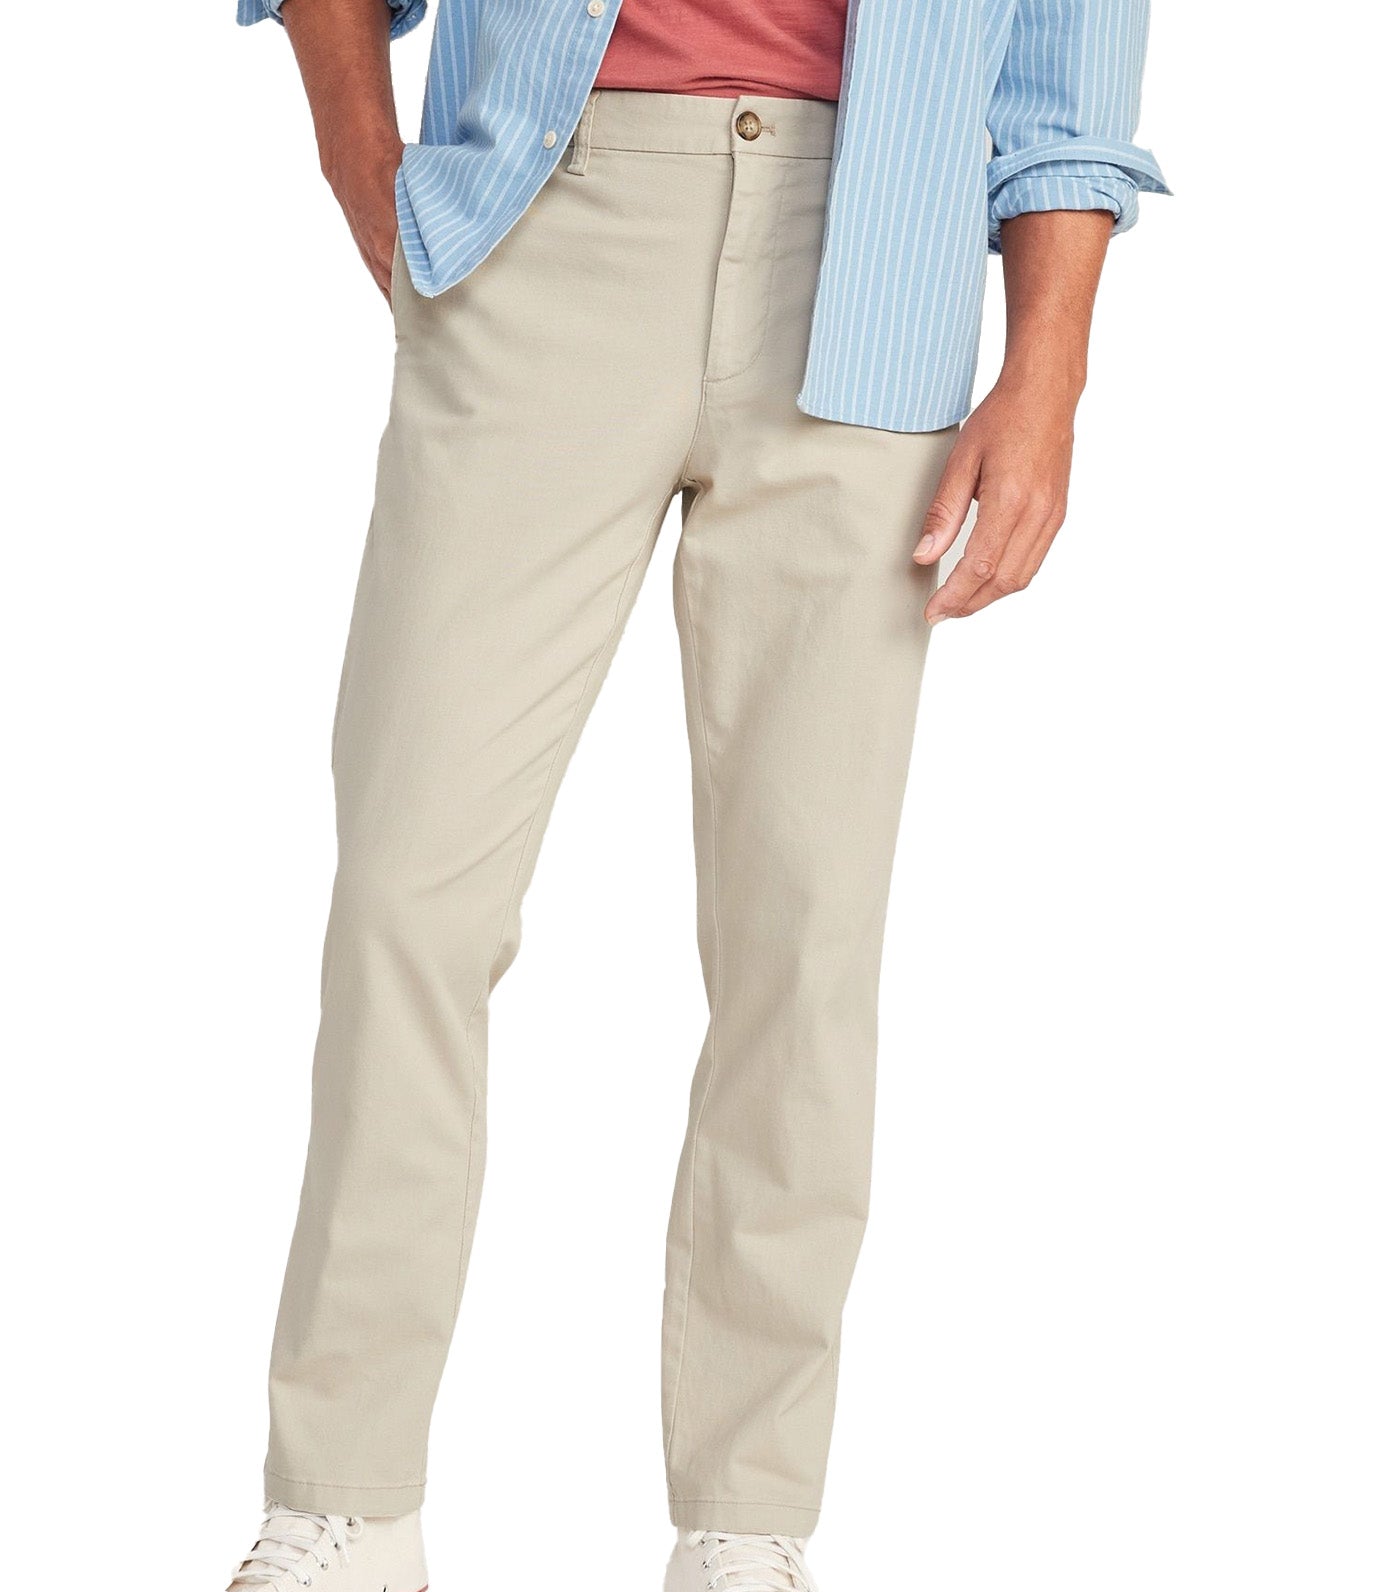 Straight Built-In Flex Rotation Chino Pants for Men A Stones Throw